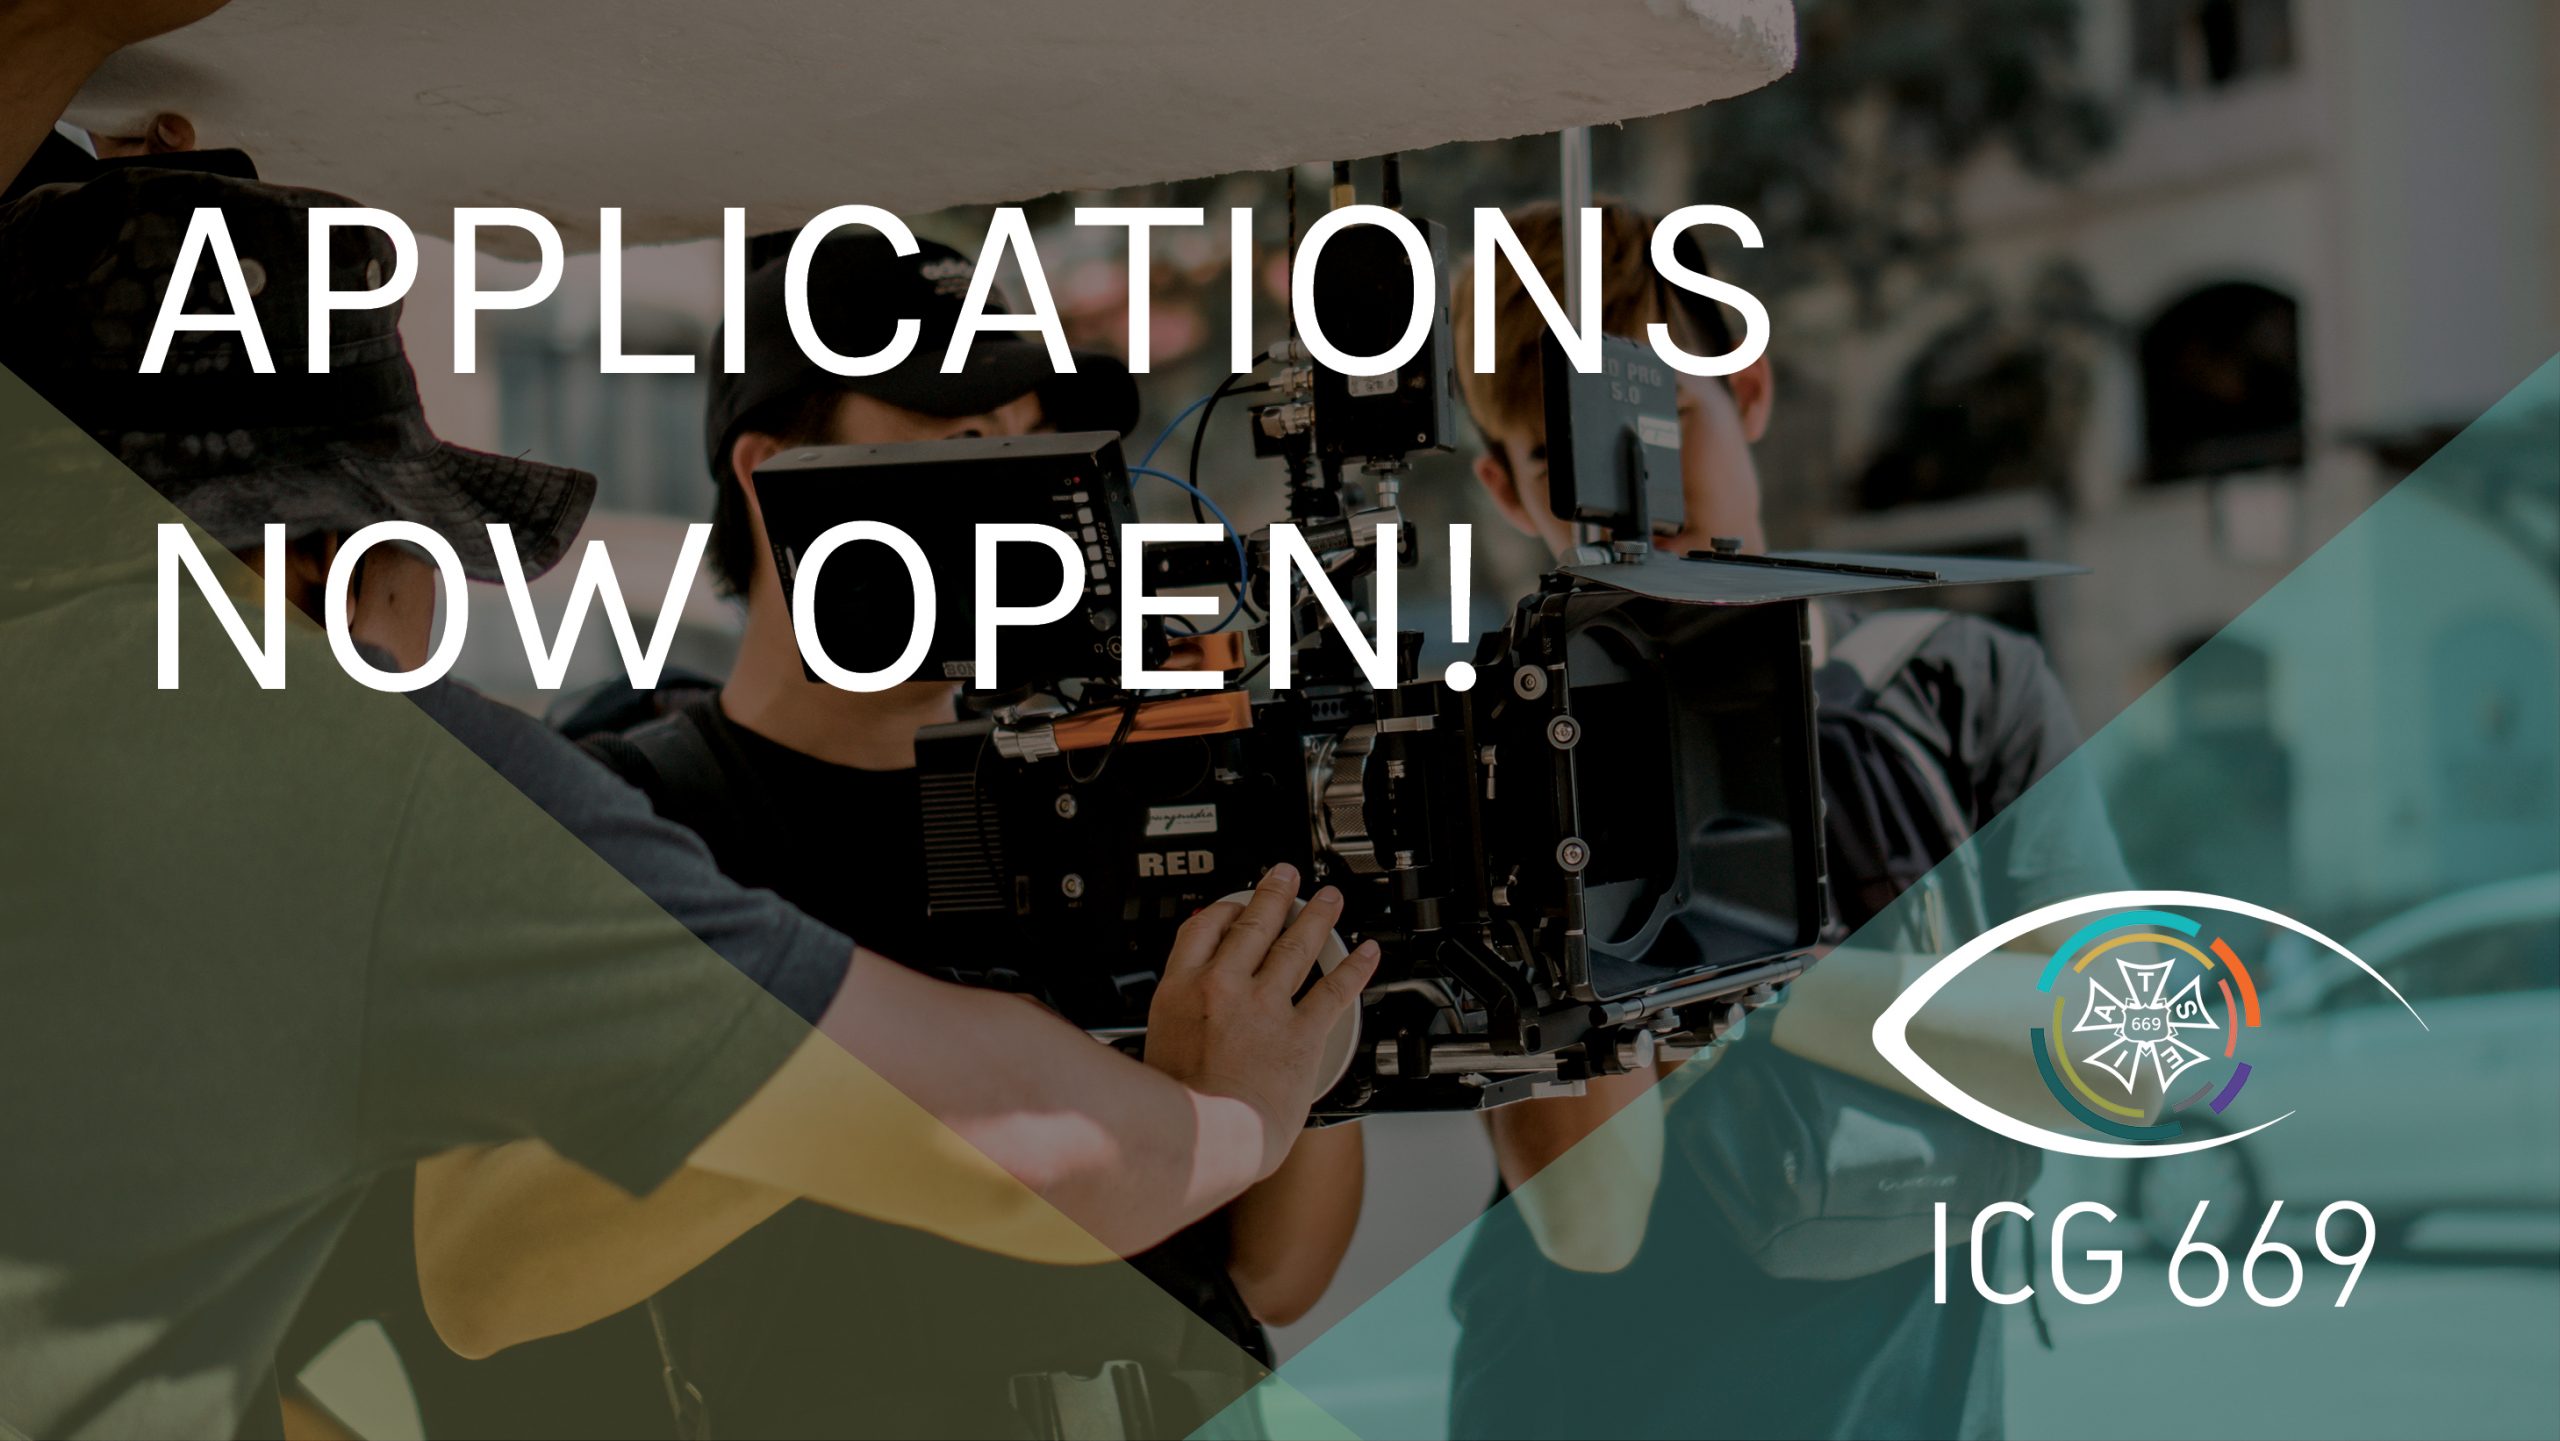 Vancouver Camera Trainee Program Applications are Now Open!